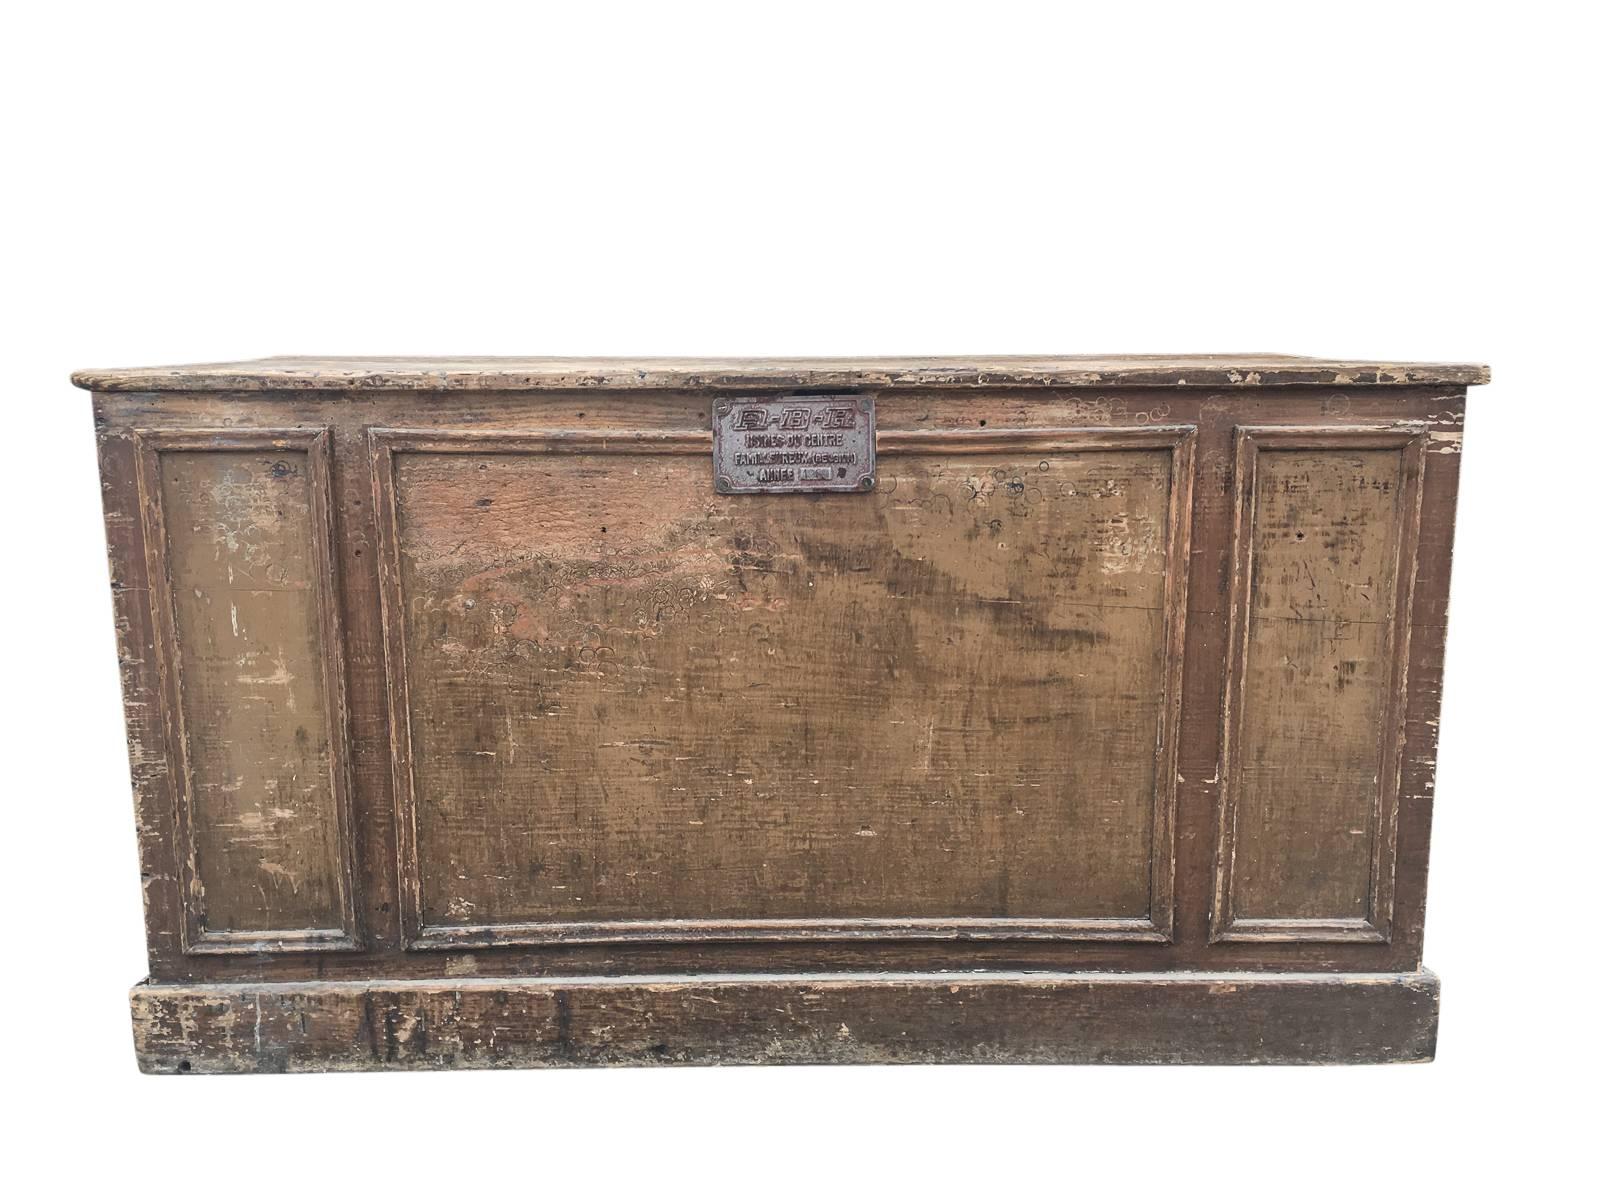 Primitive Belgian shop counter with drawer, circa 1940. Original color and surface.